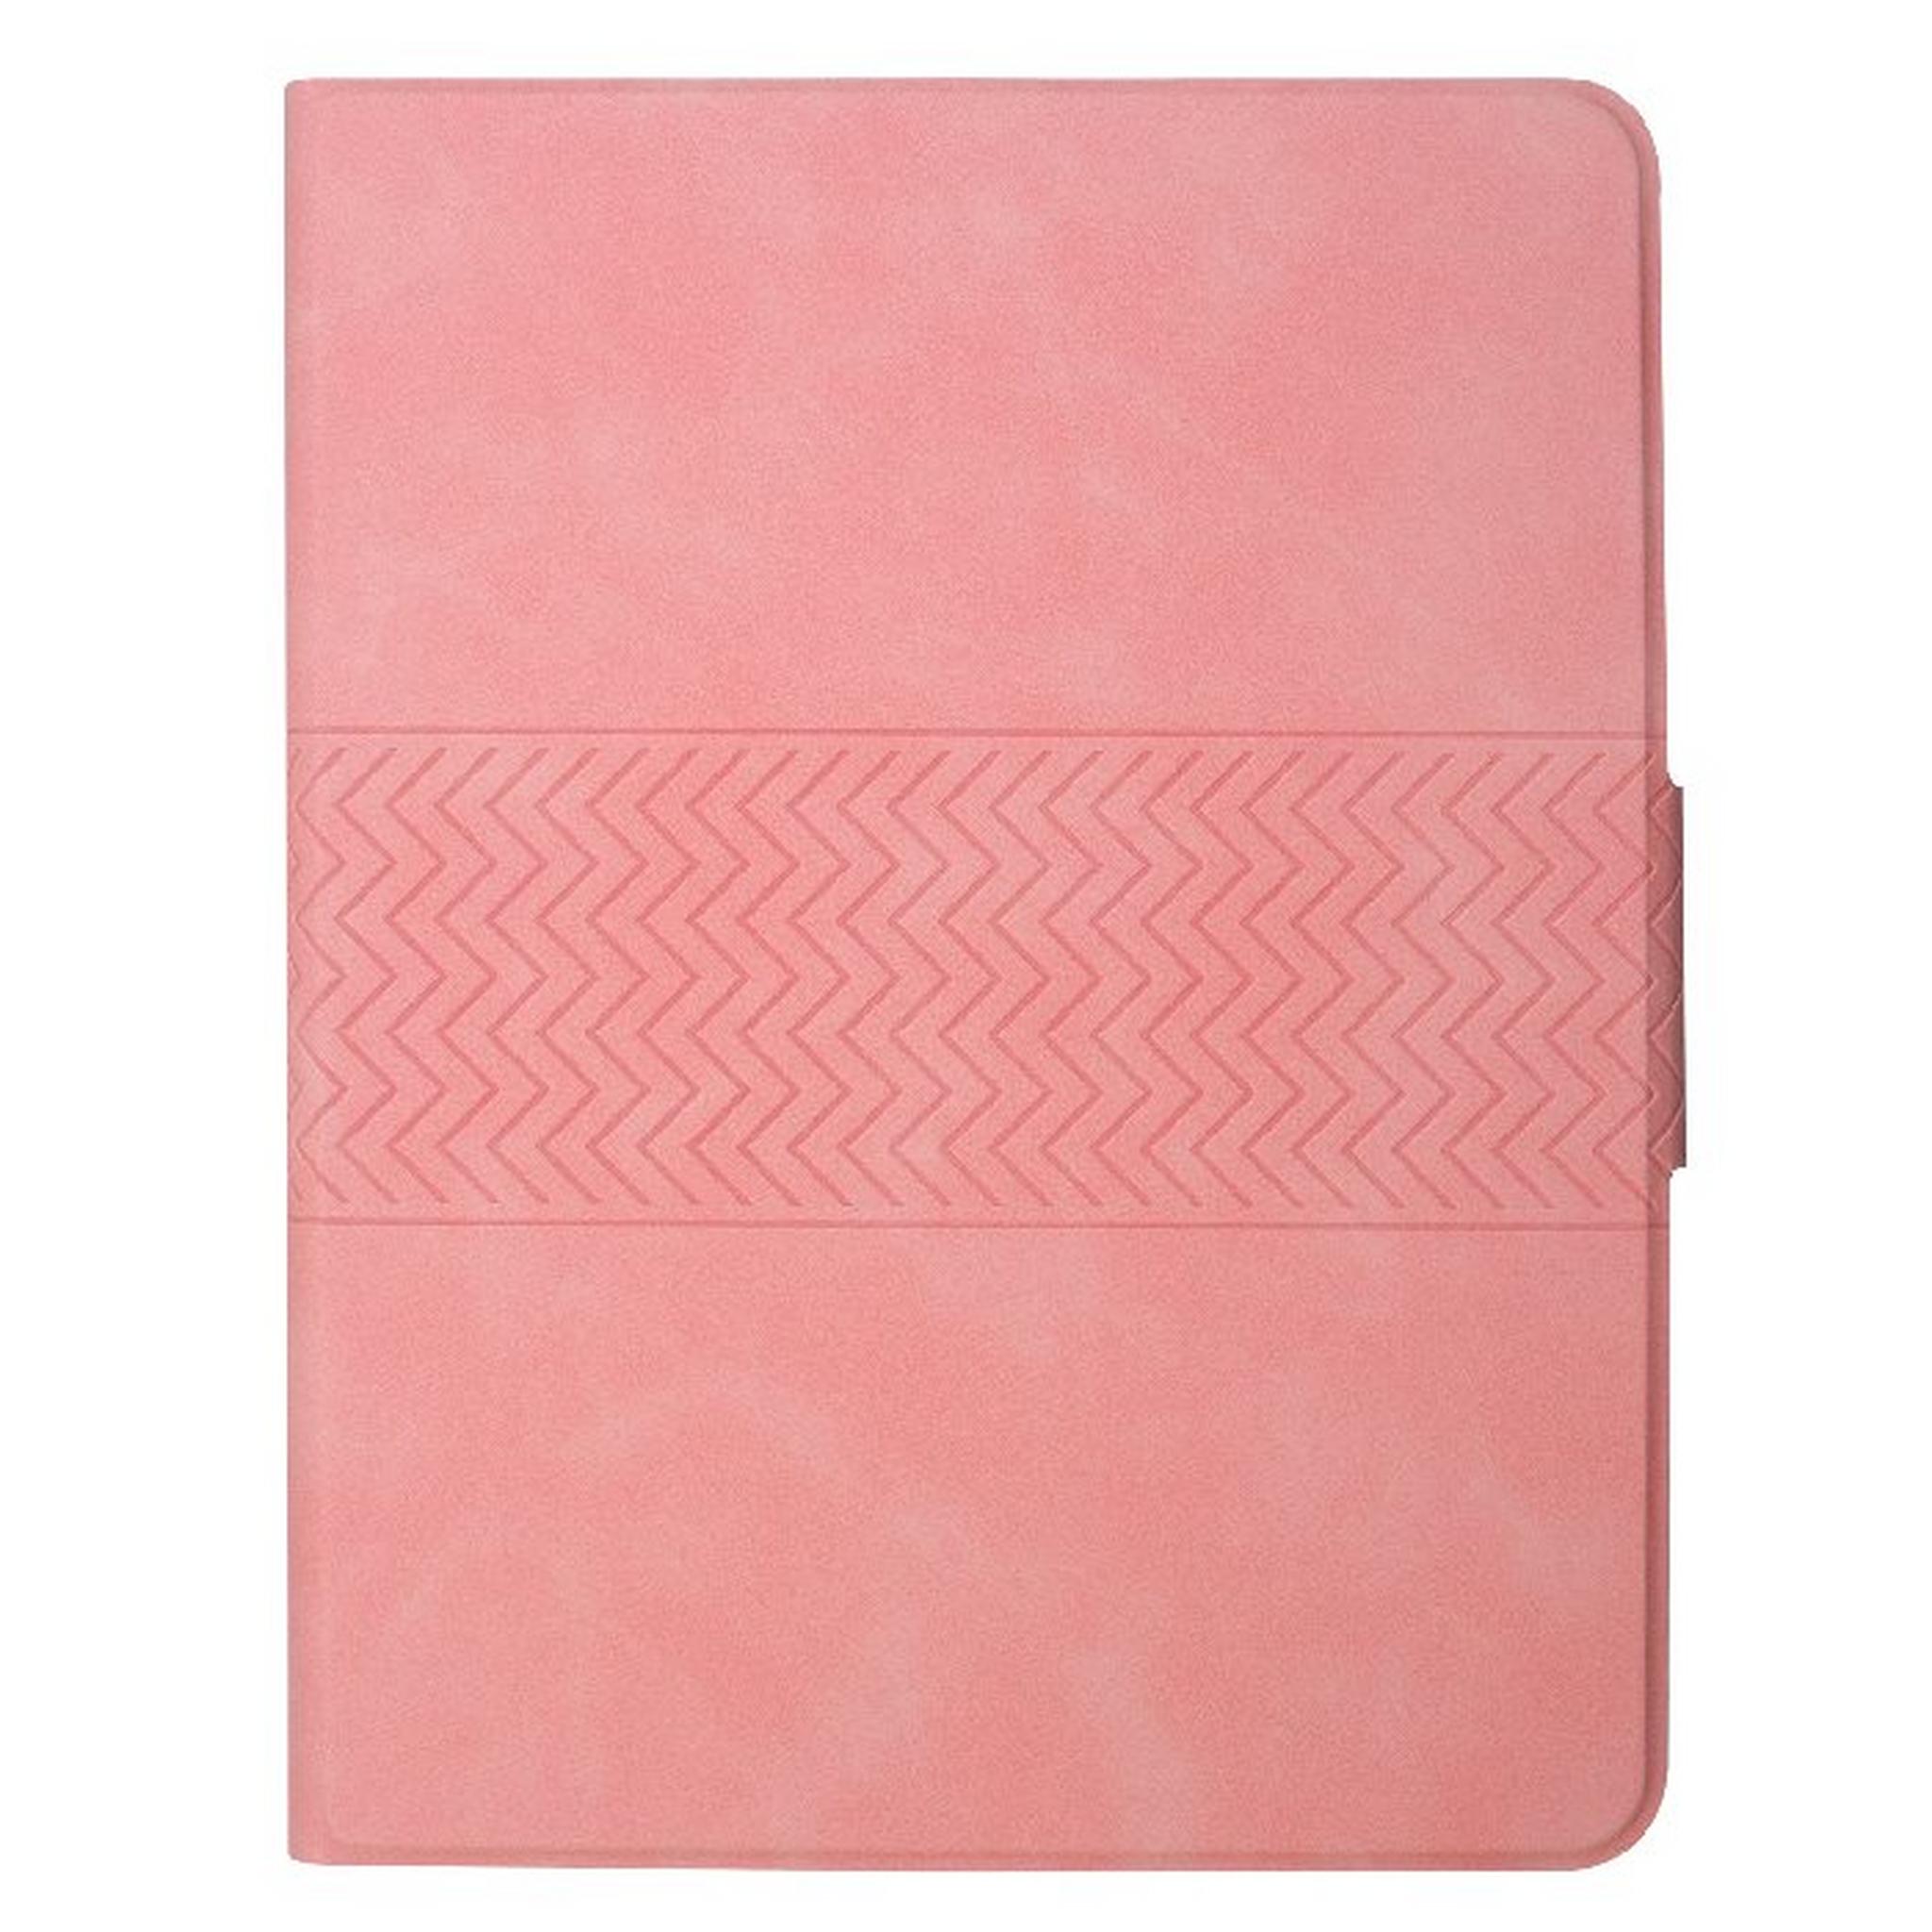 EQ Runway Case For iPad Pro 12.9inch - Pink